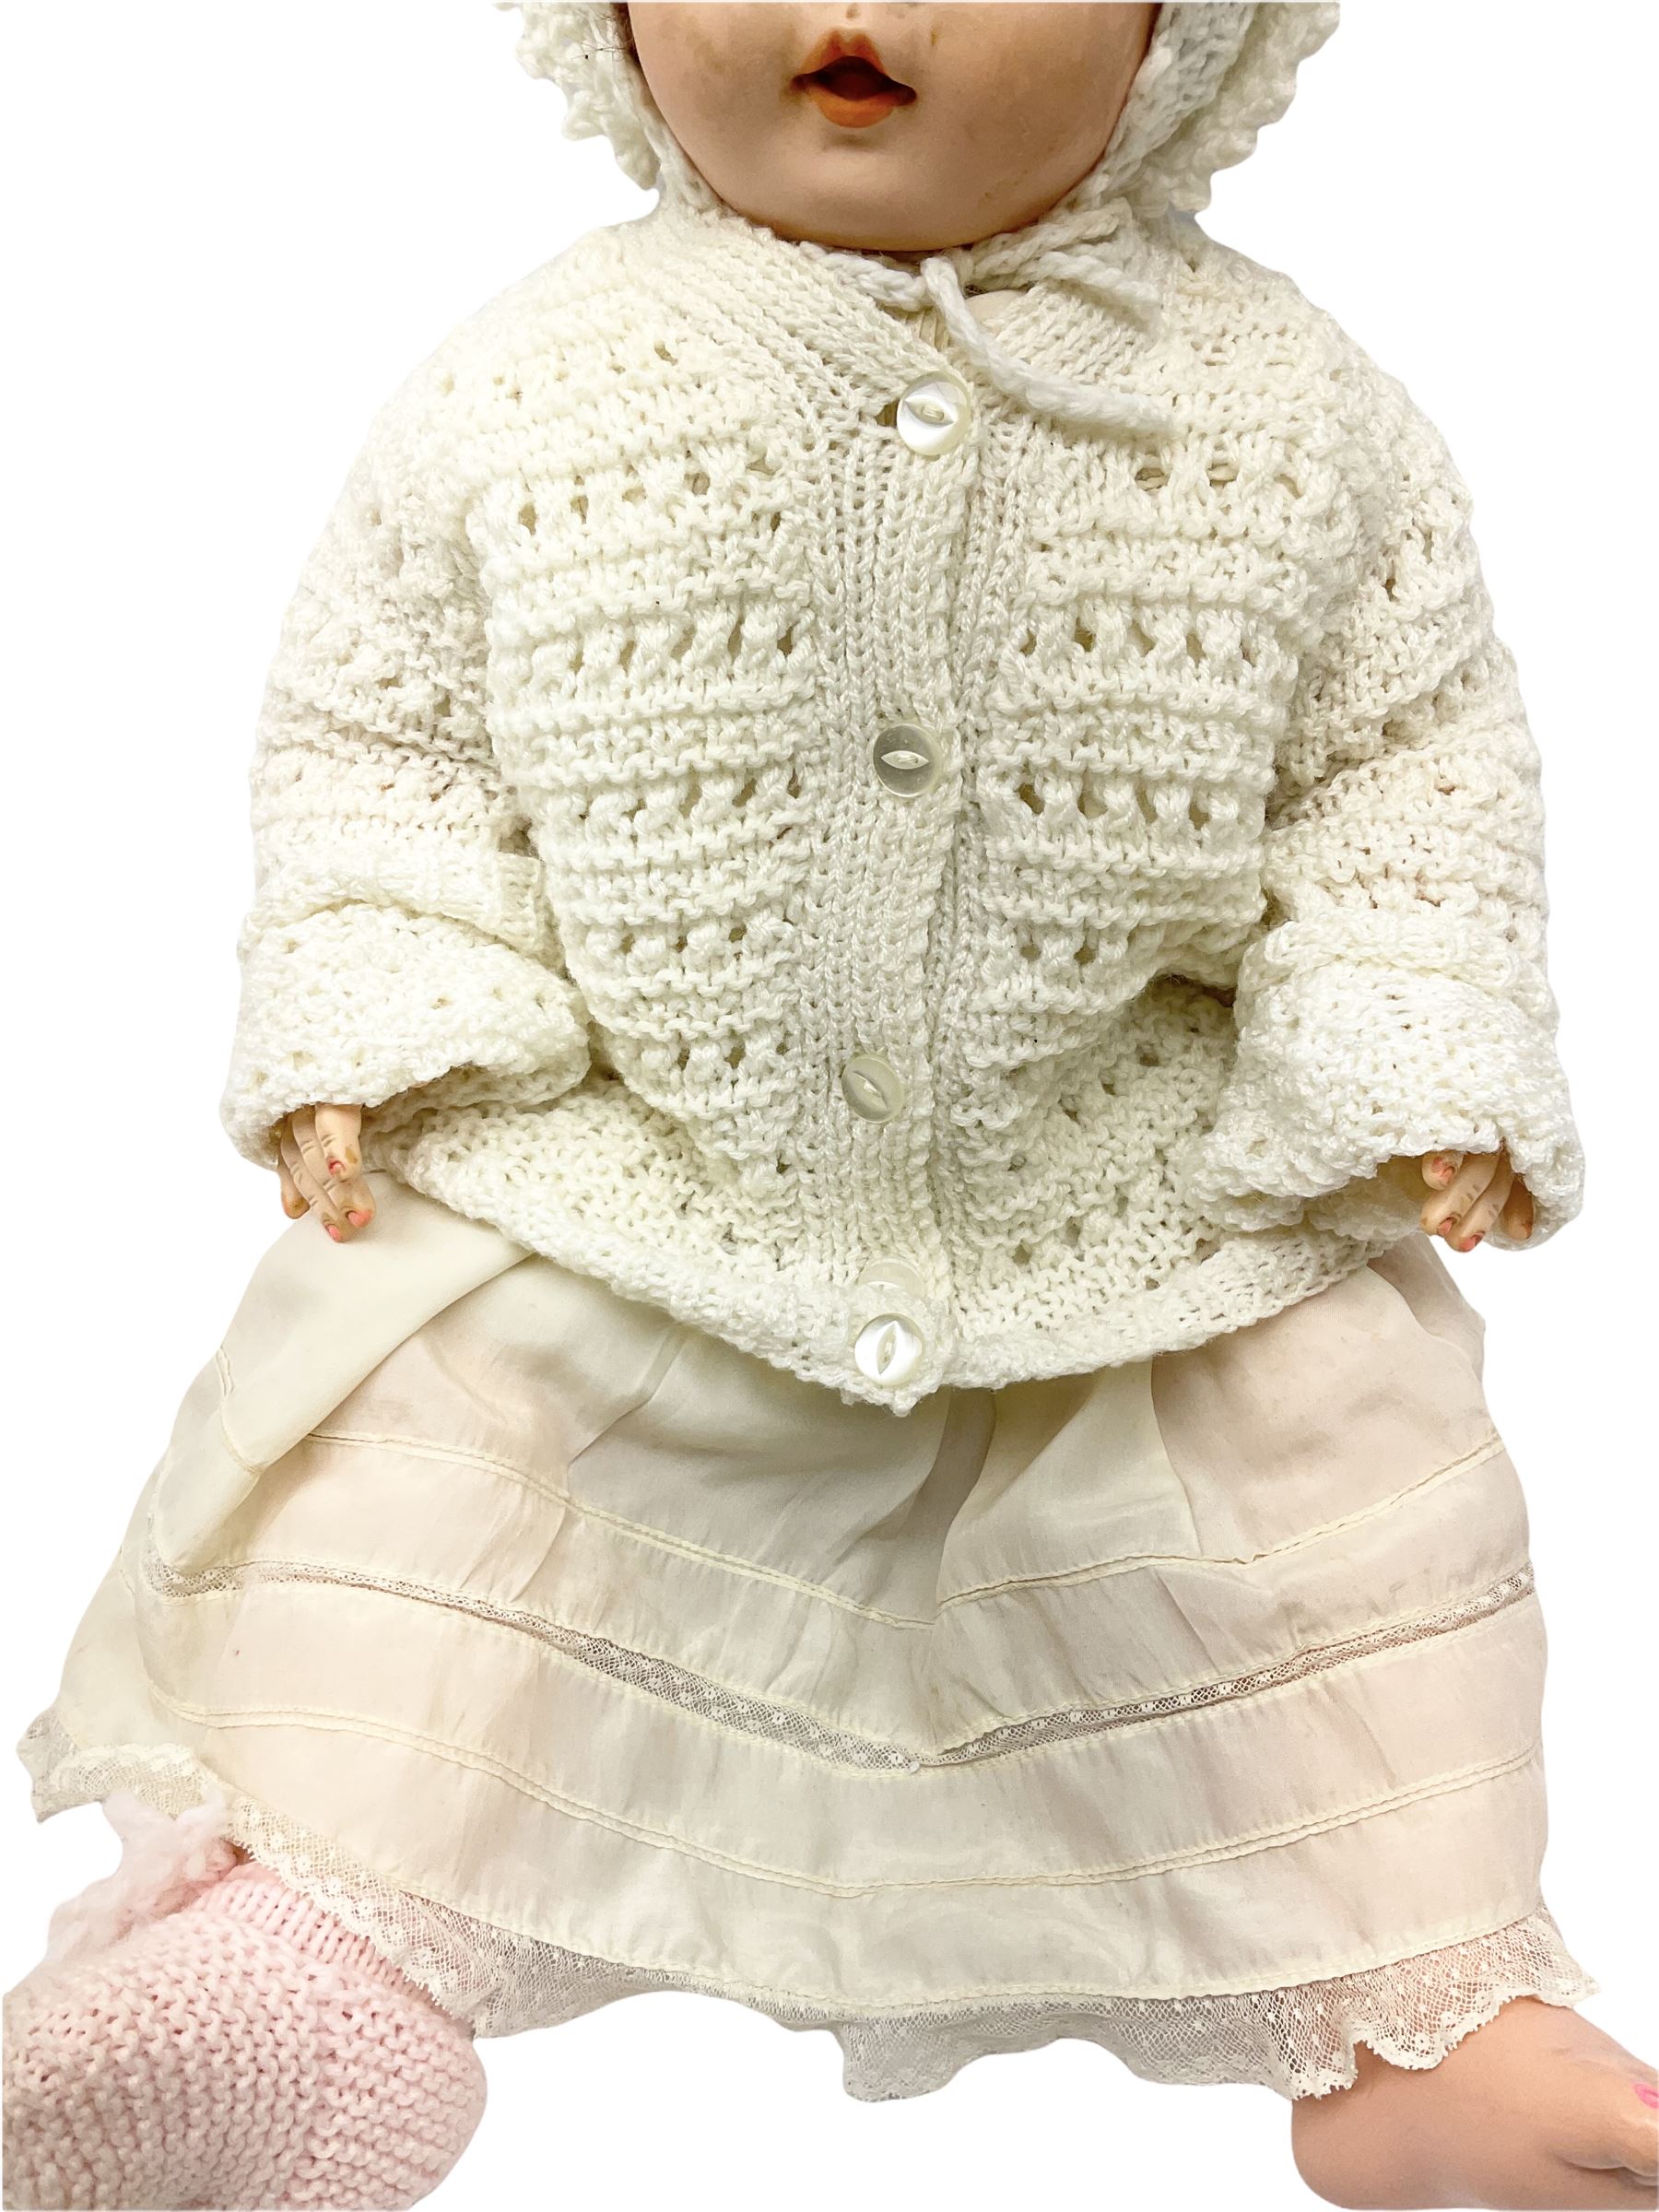 Simon & Halbig for Kammer & Reinhardt bisque head doll with applied hair - Image 5 of 11